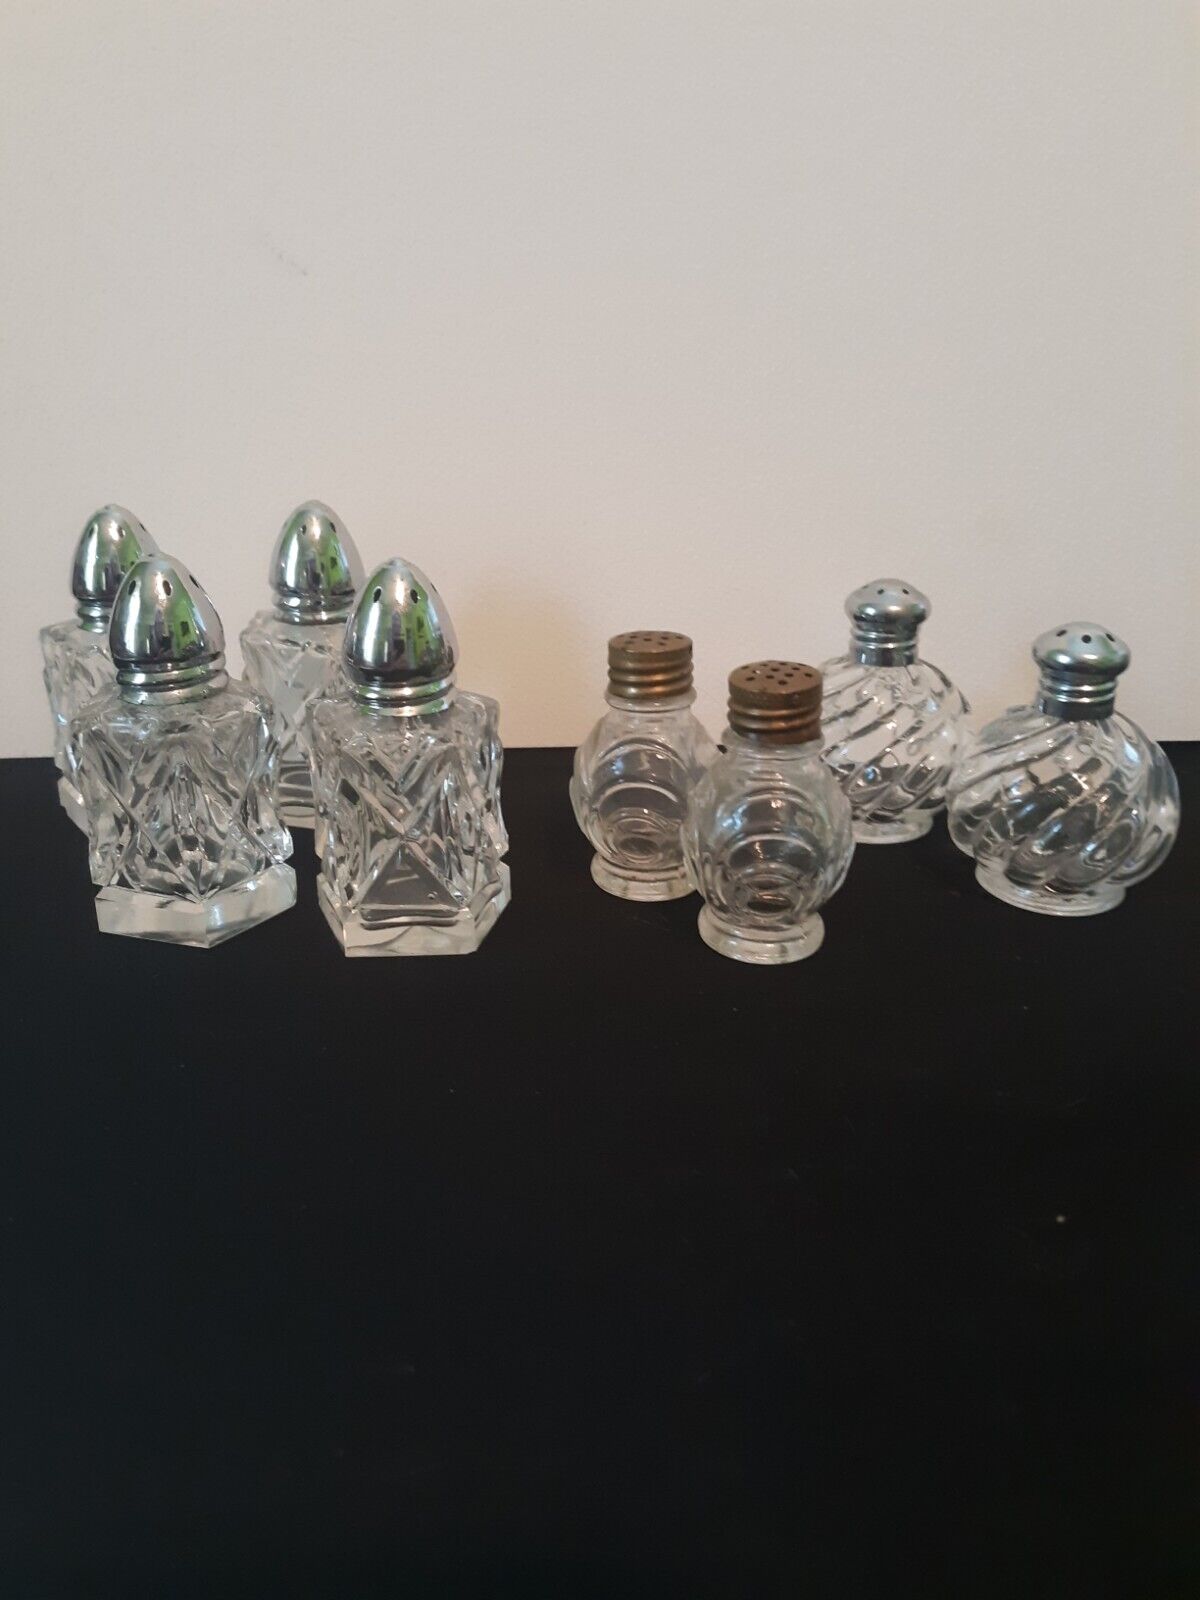 4 Pair Miniature Glass Salt and Pepper Shakers Vintage 